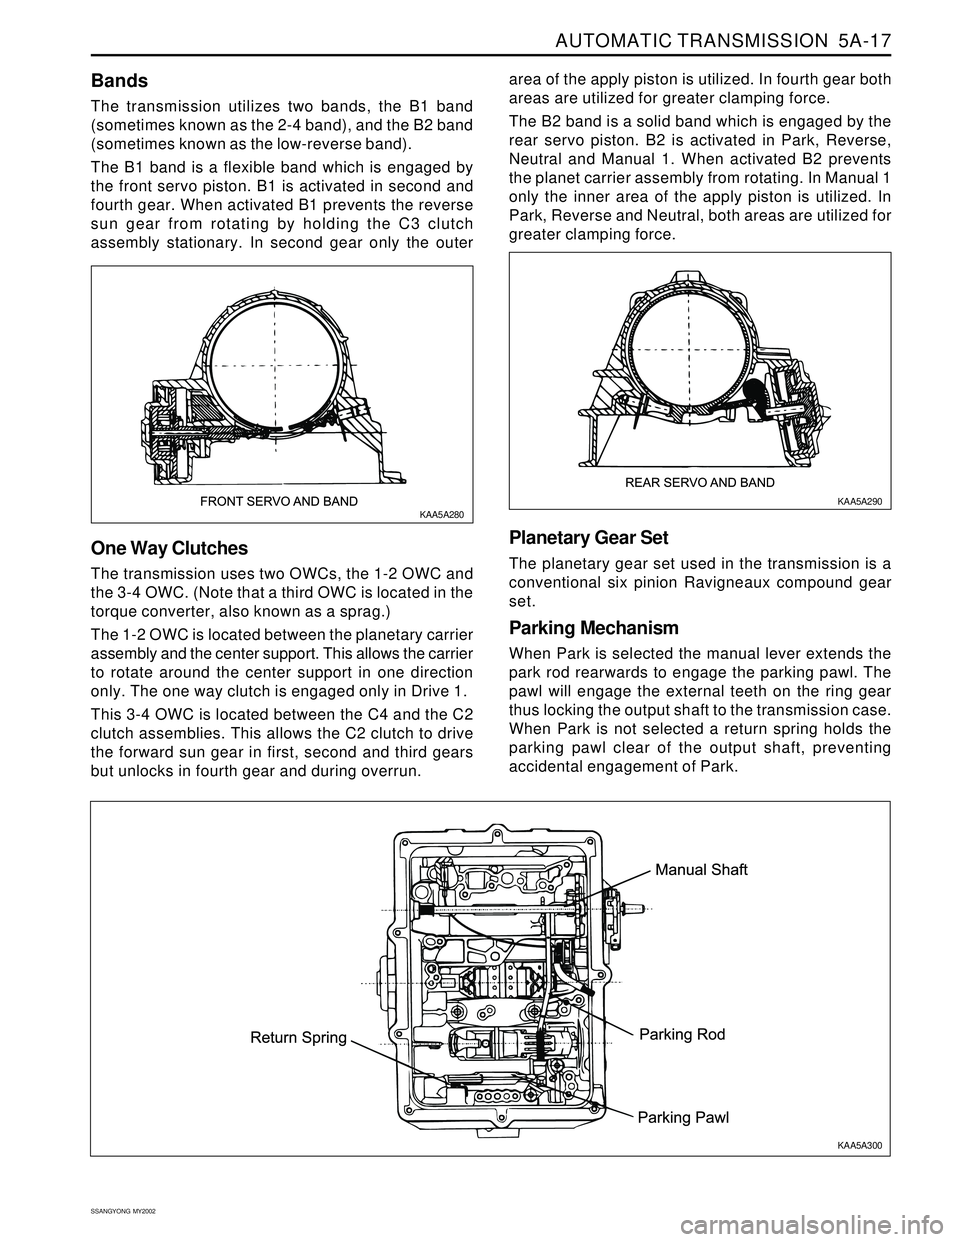 SSANGYONG KORANDO 1997  Service Repair Manual AUTOMATIC TRANSMISSION  5A-17
SSANGYONG  MY2002
Bands
The transmission utilizes two bands, the B1 band
(sometimes known as the 2-4 band), and the B2 band
(sometimes known as the low-reverse band).
The